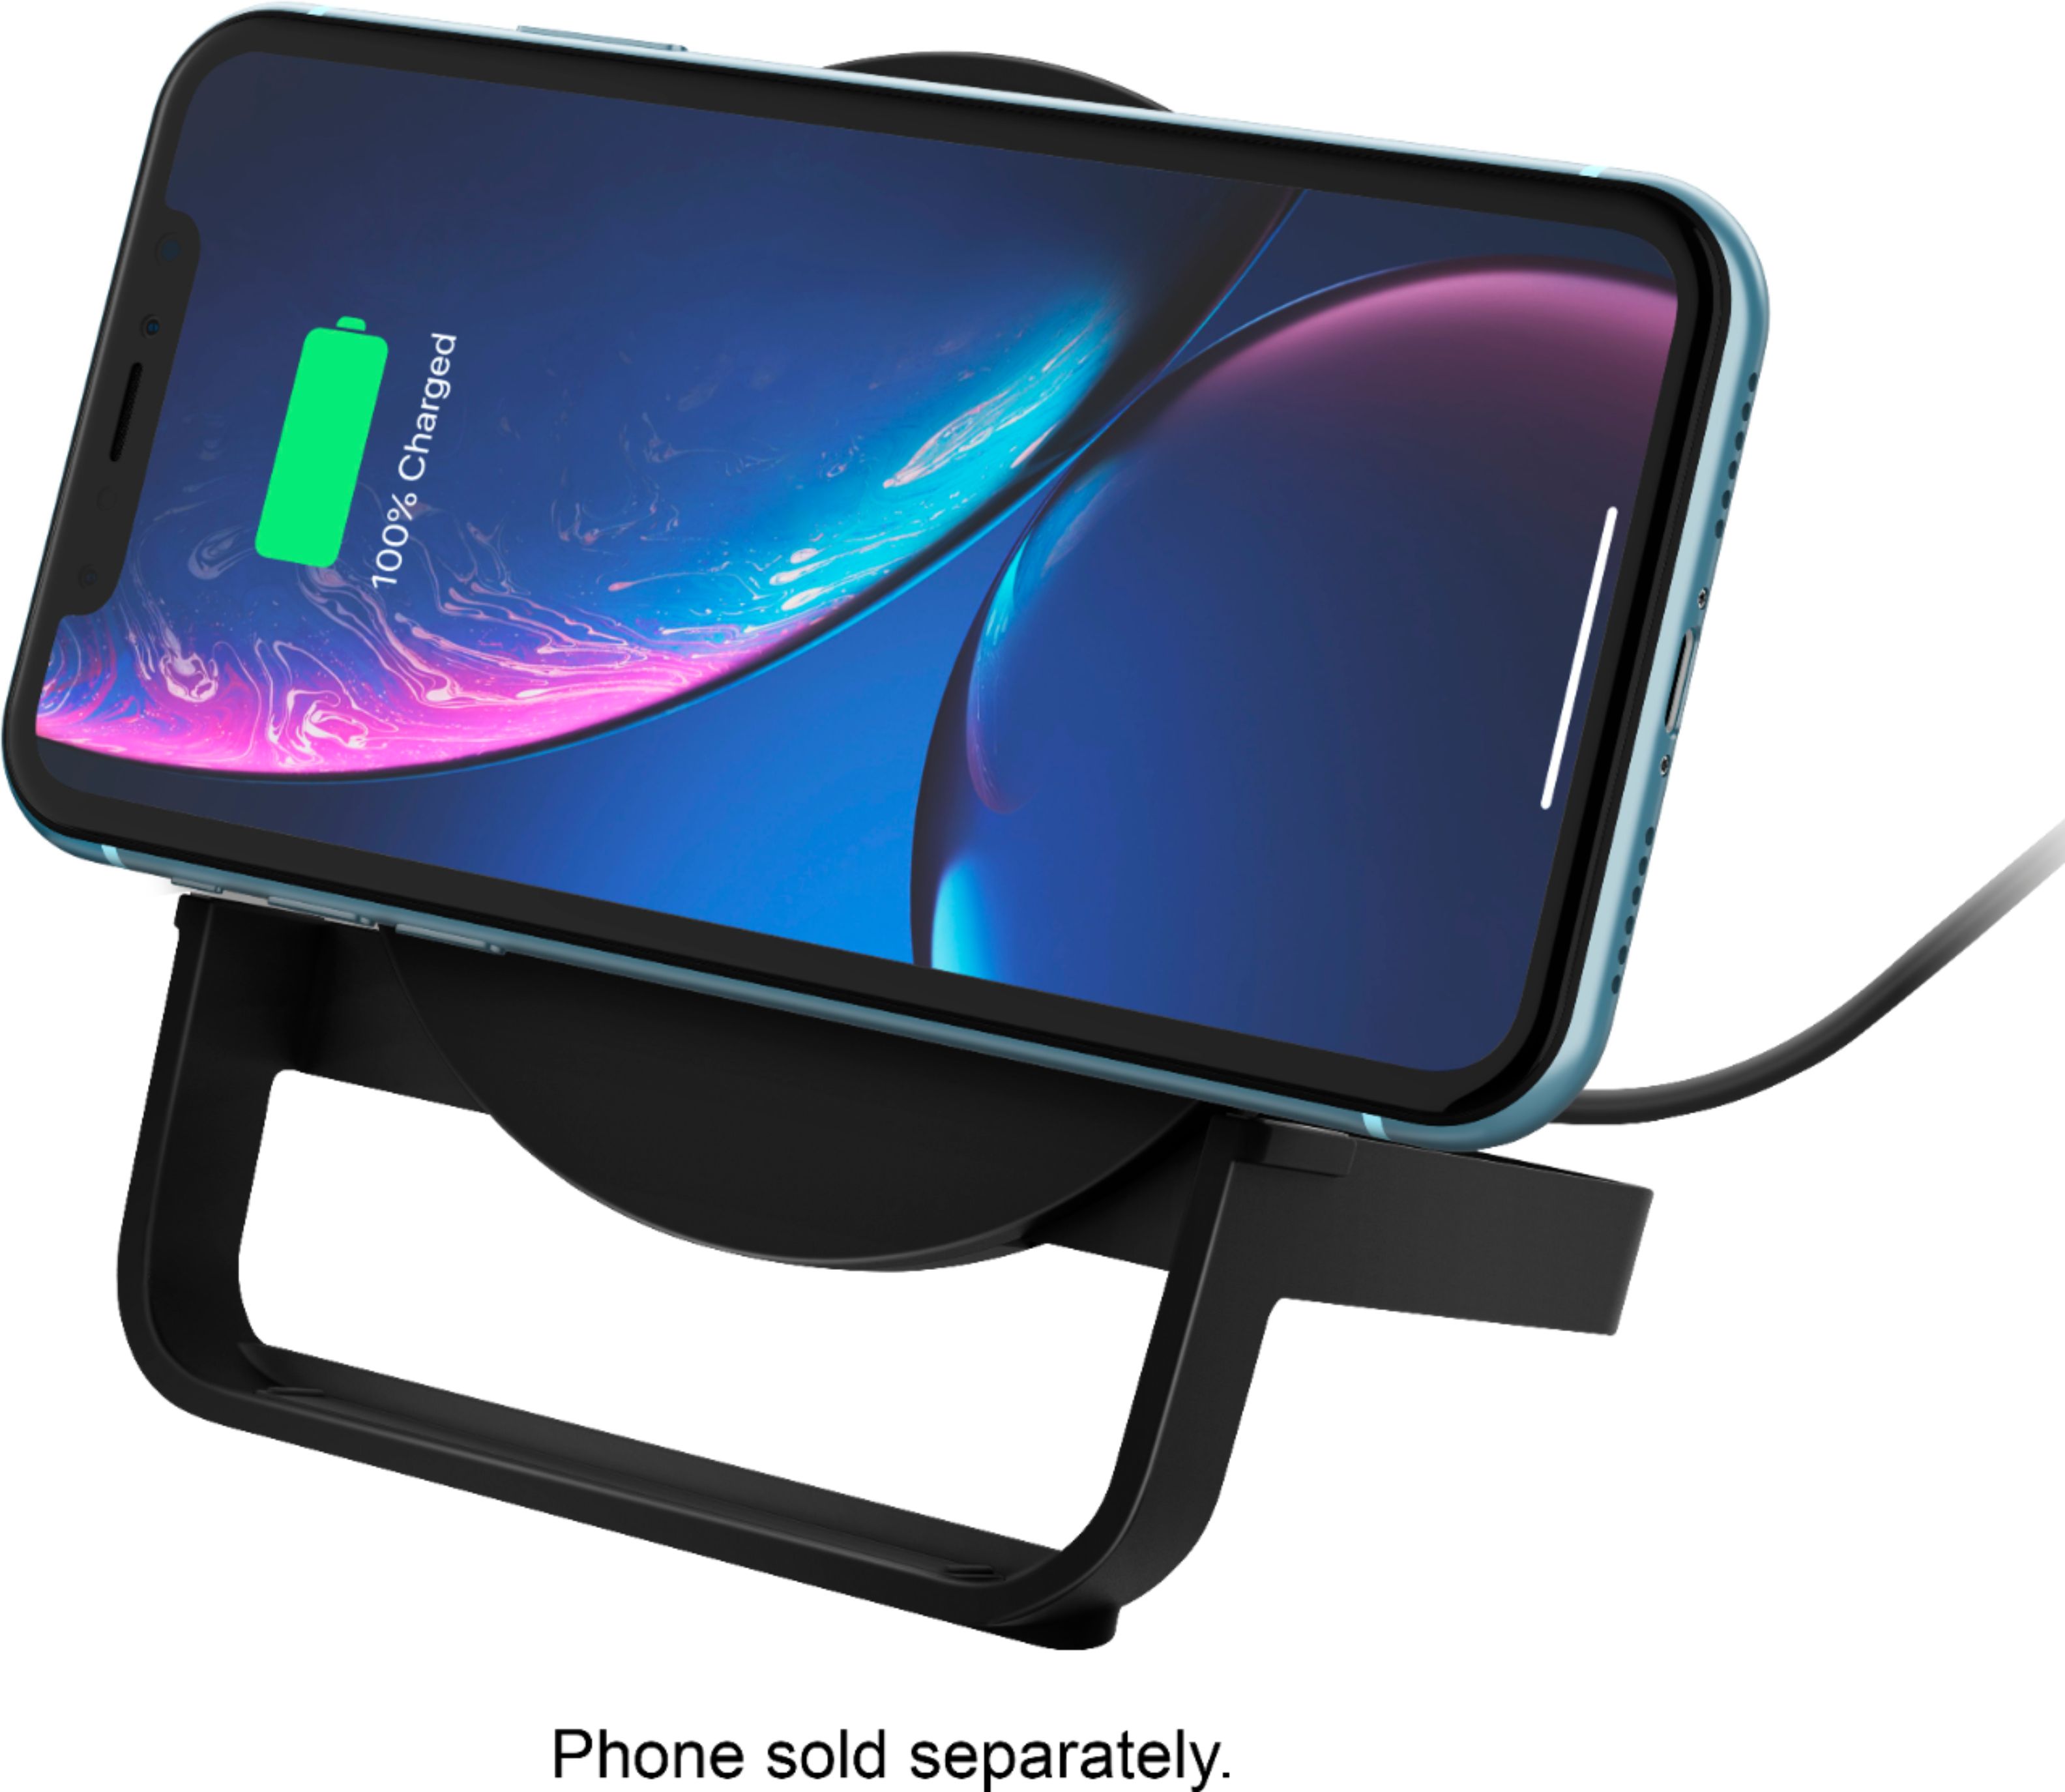 Belkin BoostUp 10K Magnetic Portable Wireless Charger for iPhone